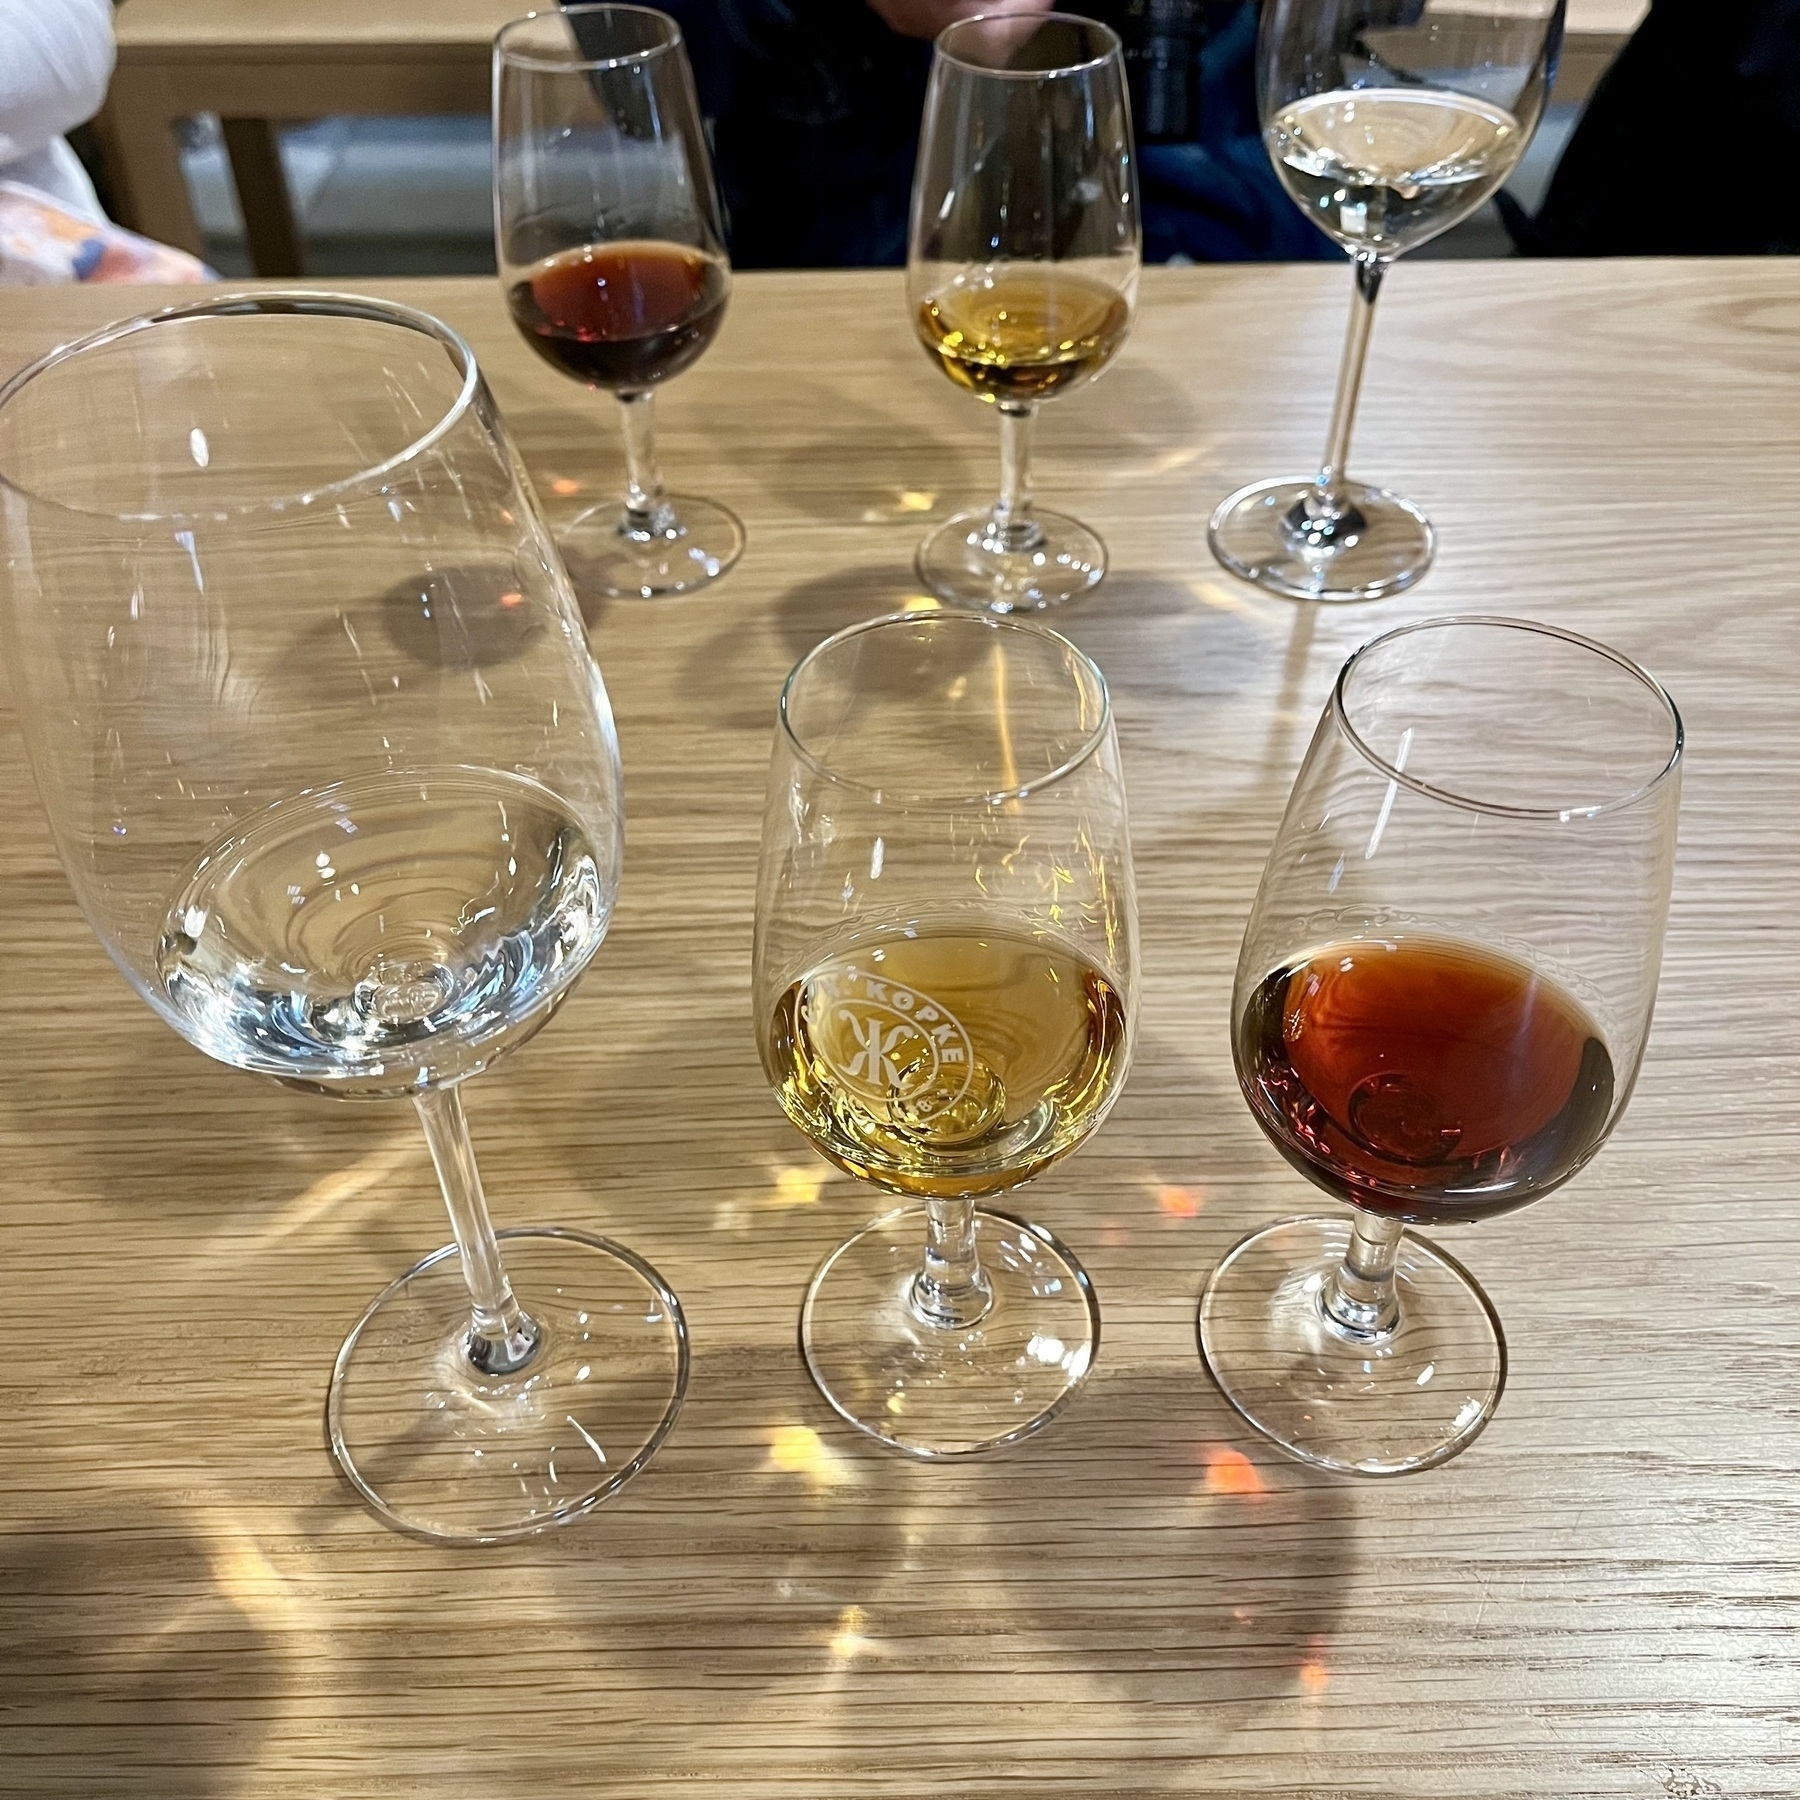 Five glasses rest on a table, containing clear, golden, and dark liquids, suggesting a tasting event. The wooden surface and glassware convey a social setting.